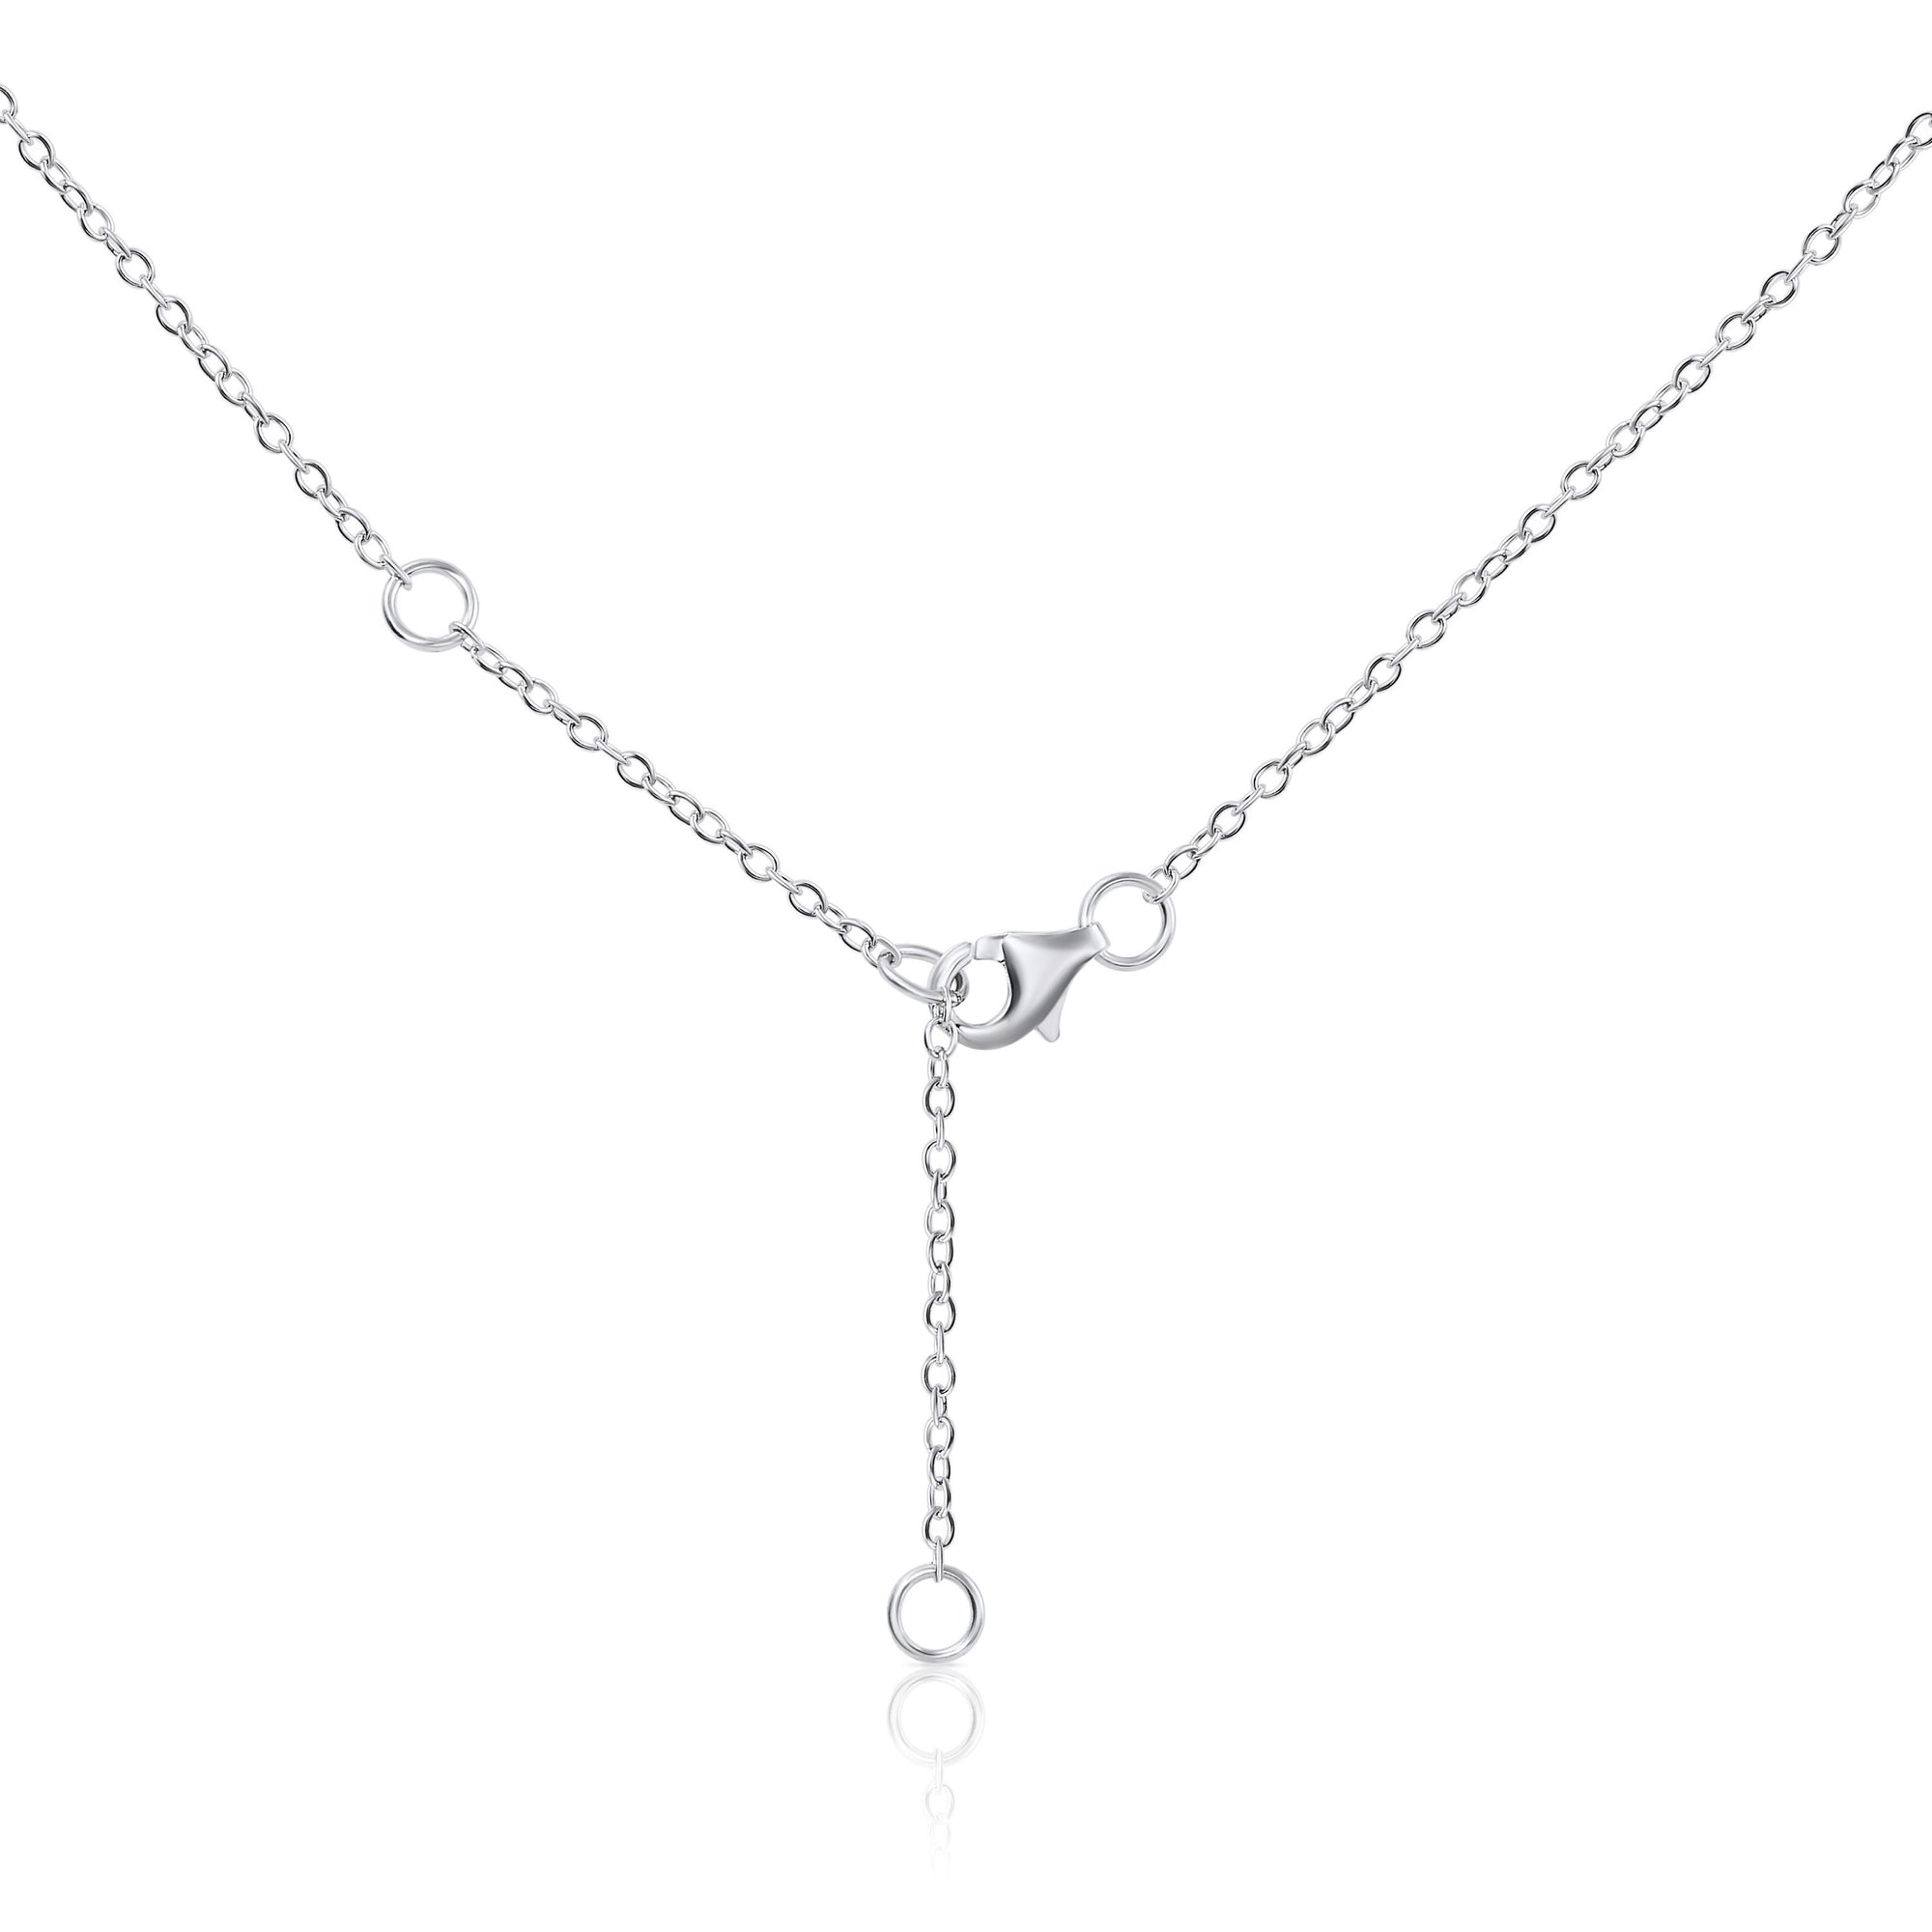 CZ Shining Star Charm Necklace in Sterling Silver